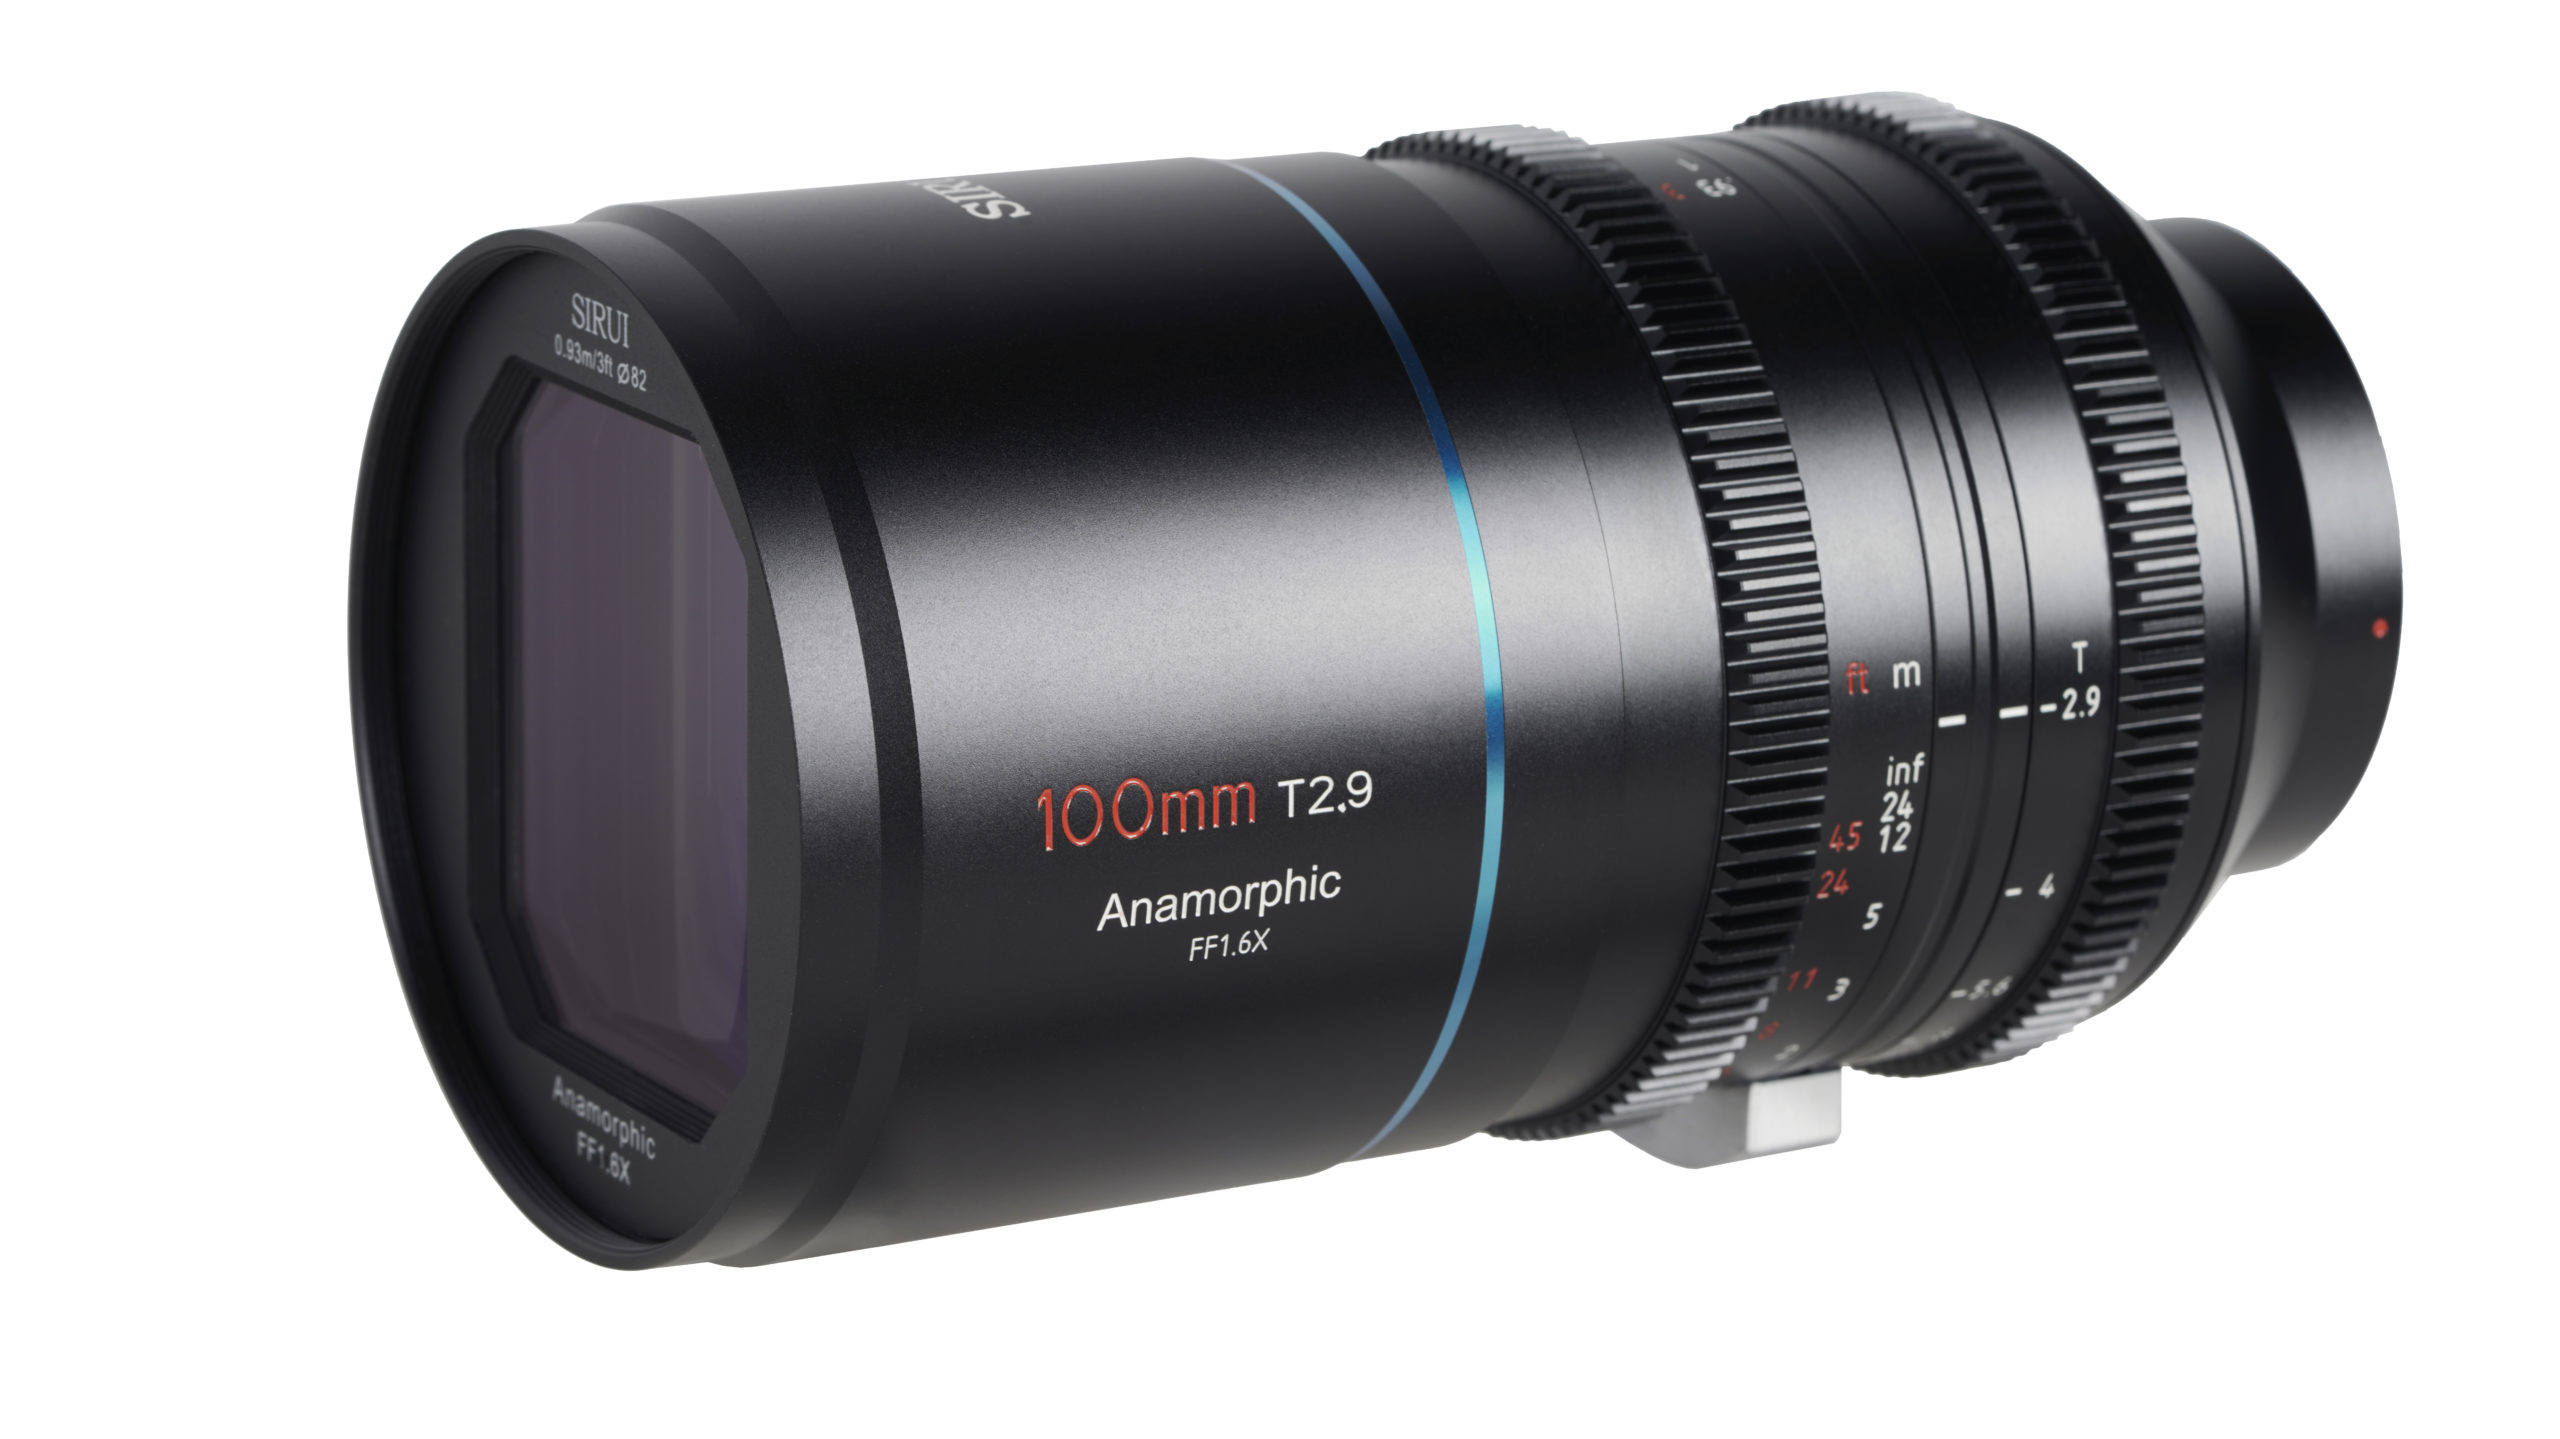 Sirui 100mm T2.9 1.6x Anamorphic lens for Sony E Mount